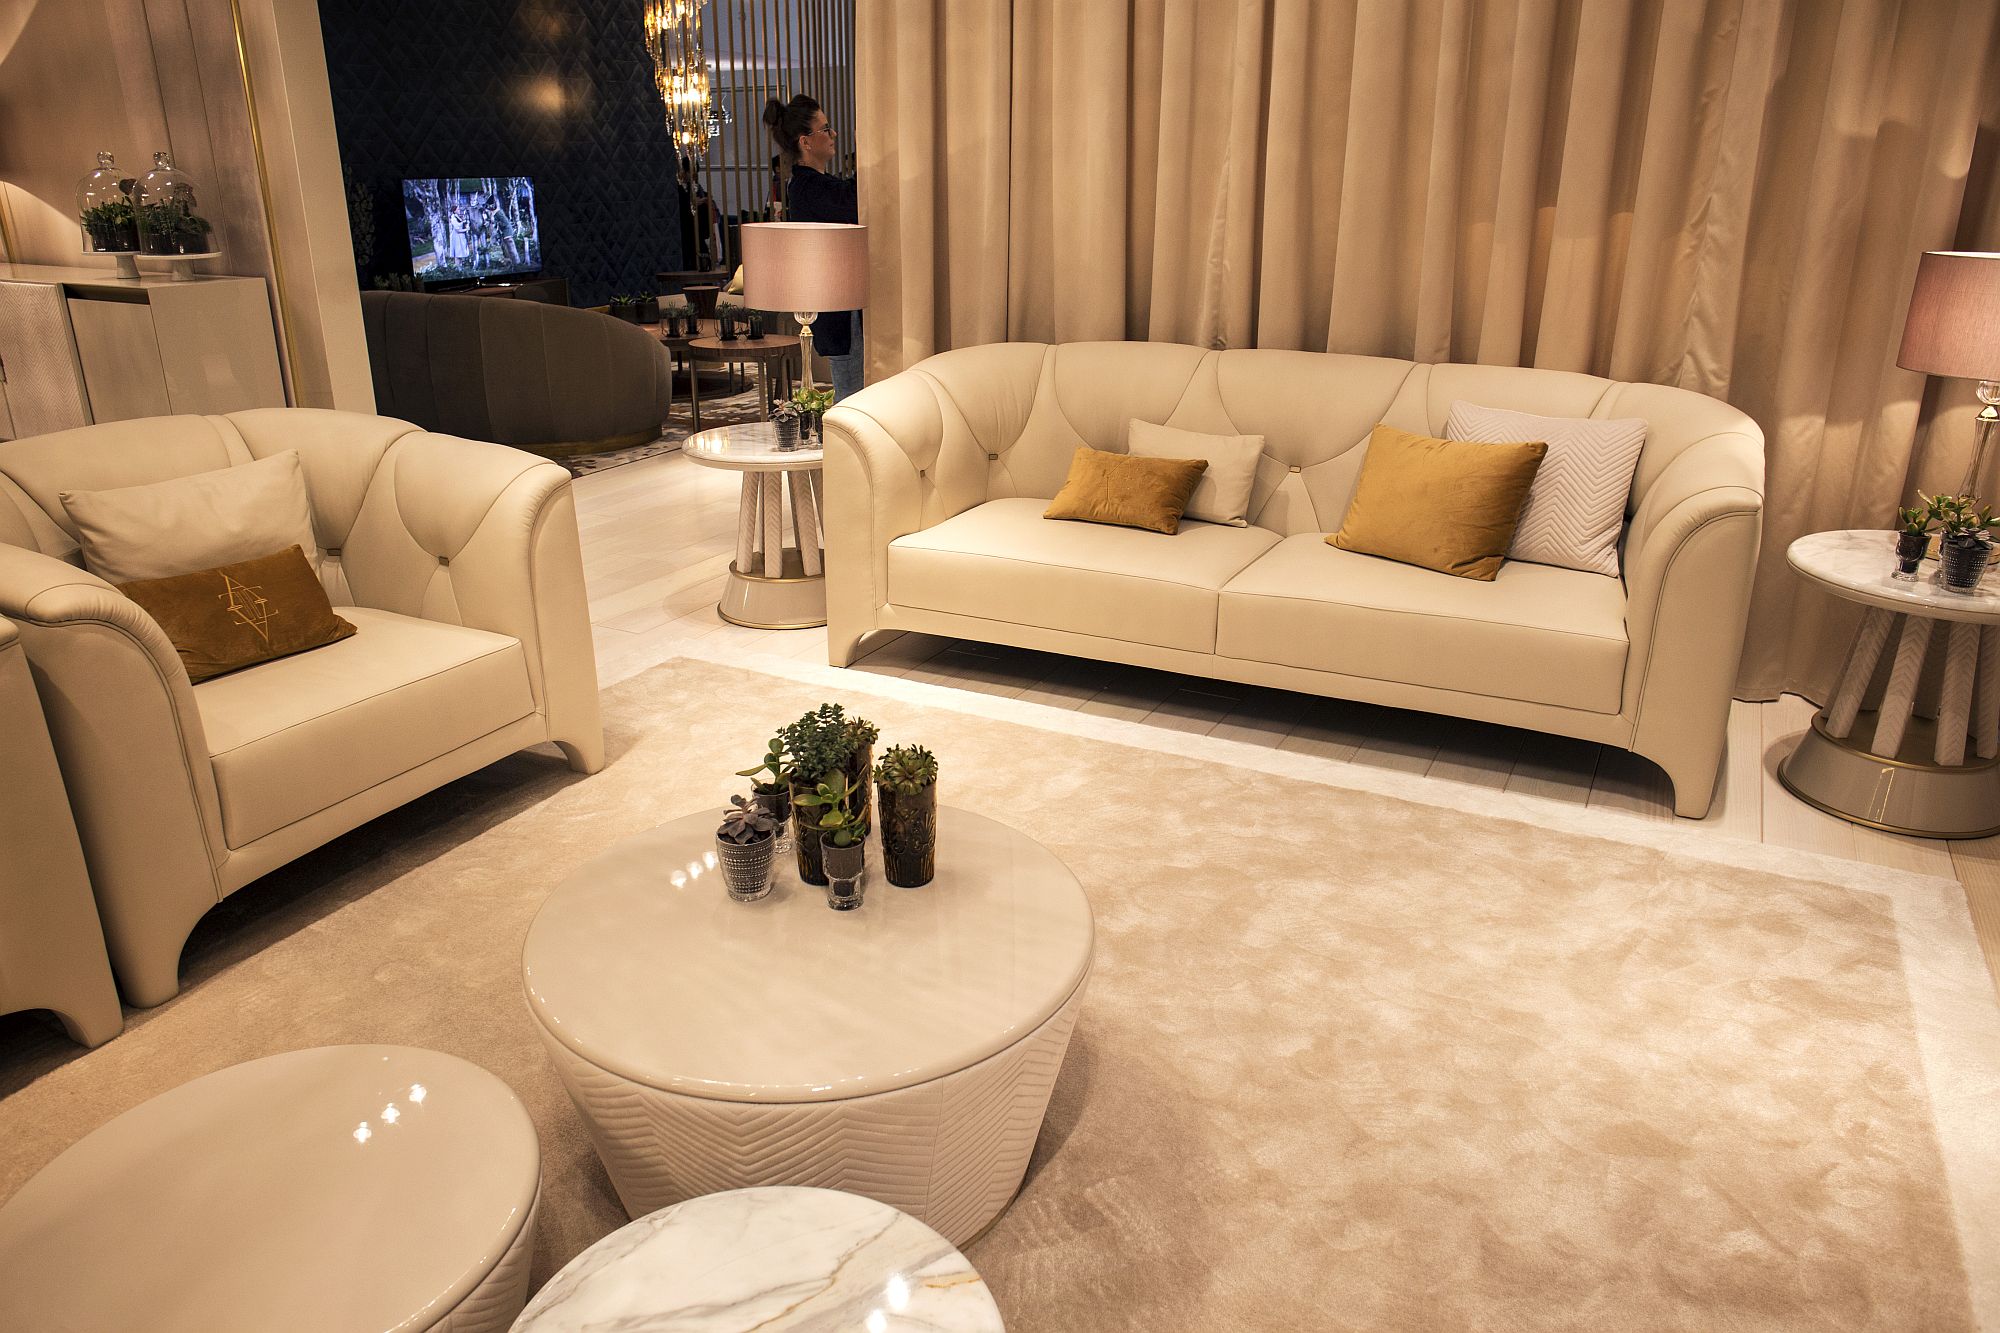 Plush couch in white with accent pillows in gold